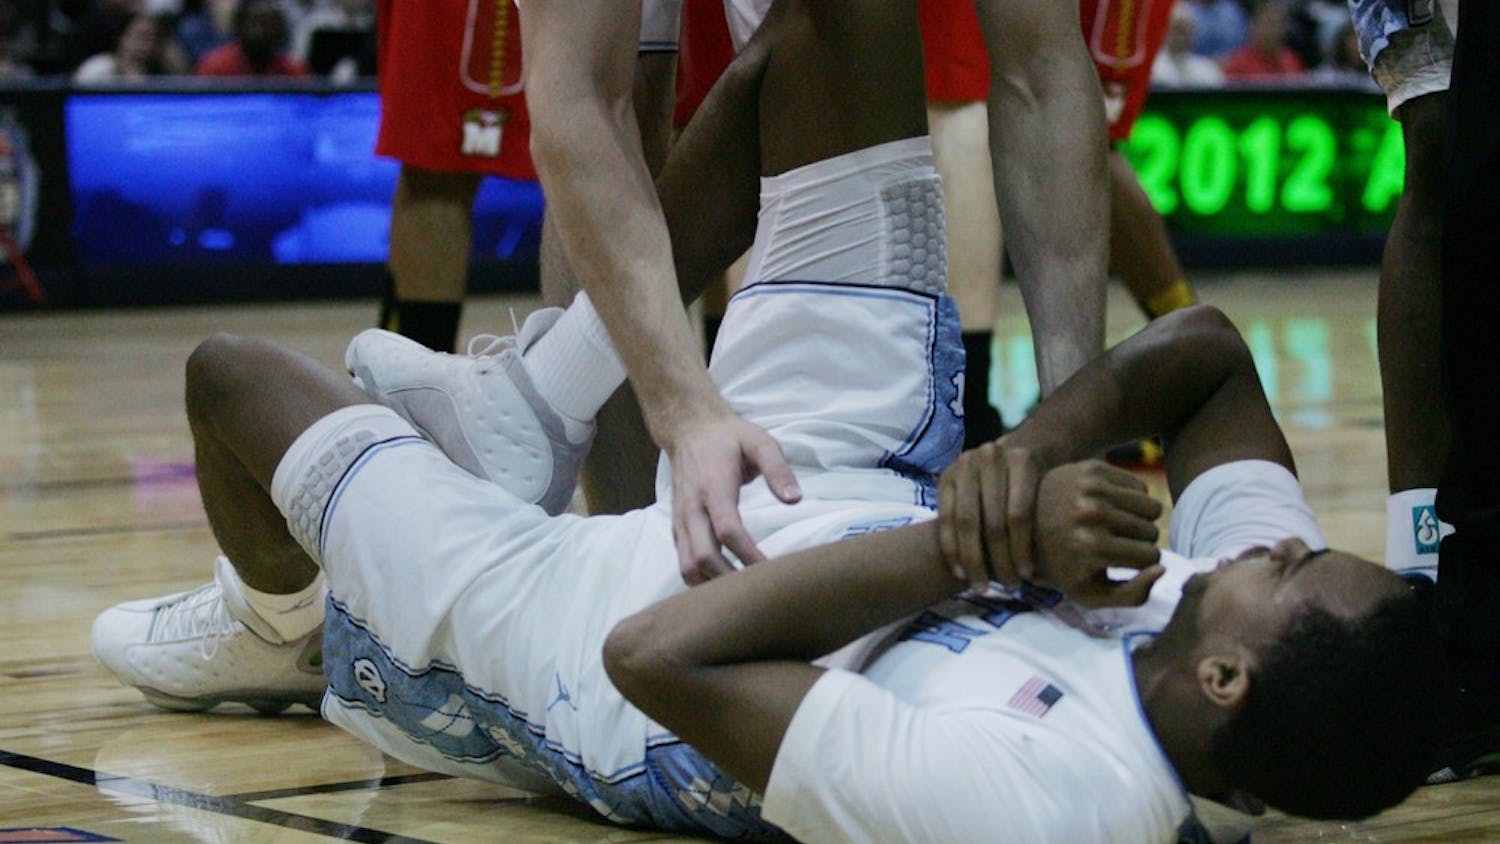 Junior John Henson grabs his wrist after getting injured early in the game. Henson spent most of the night on the bench tending to his wrist, seeing only 7 minutes of play time and scoring only 3 points for the night. 